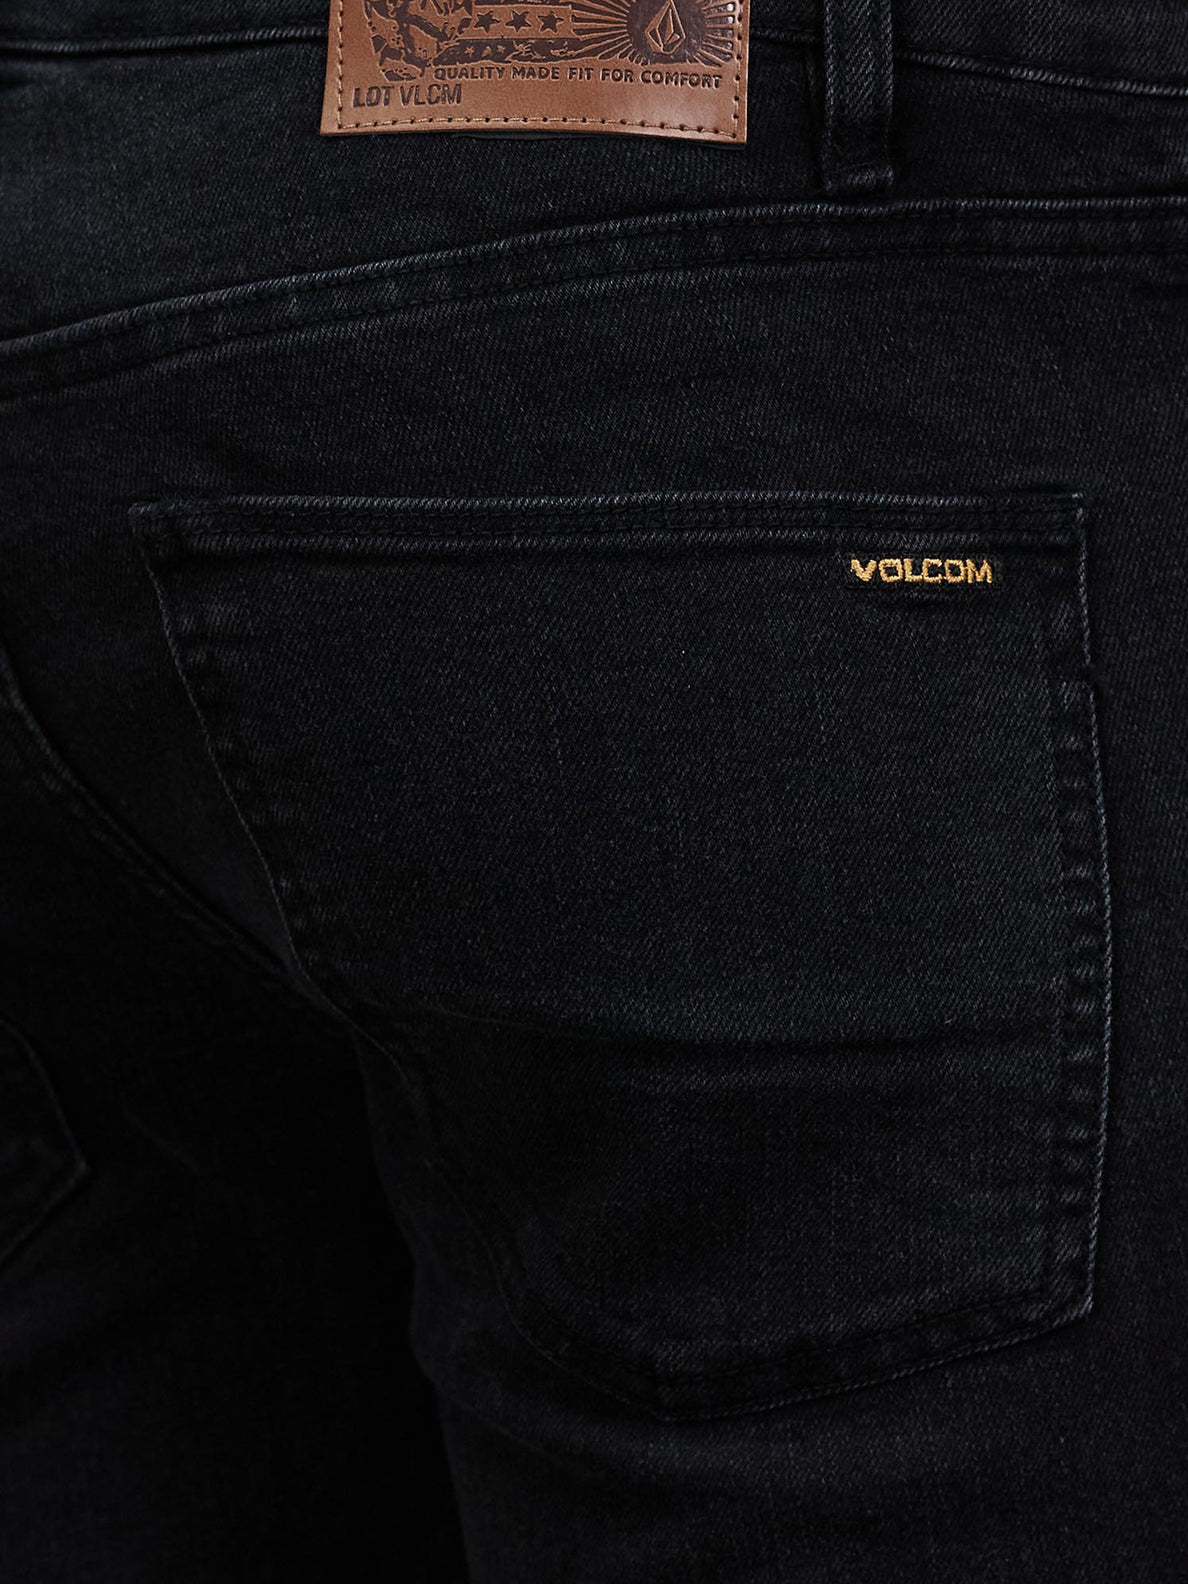 2X4 Skinny Tapered Jeans - Blackout